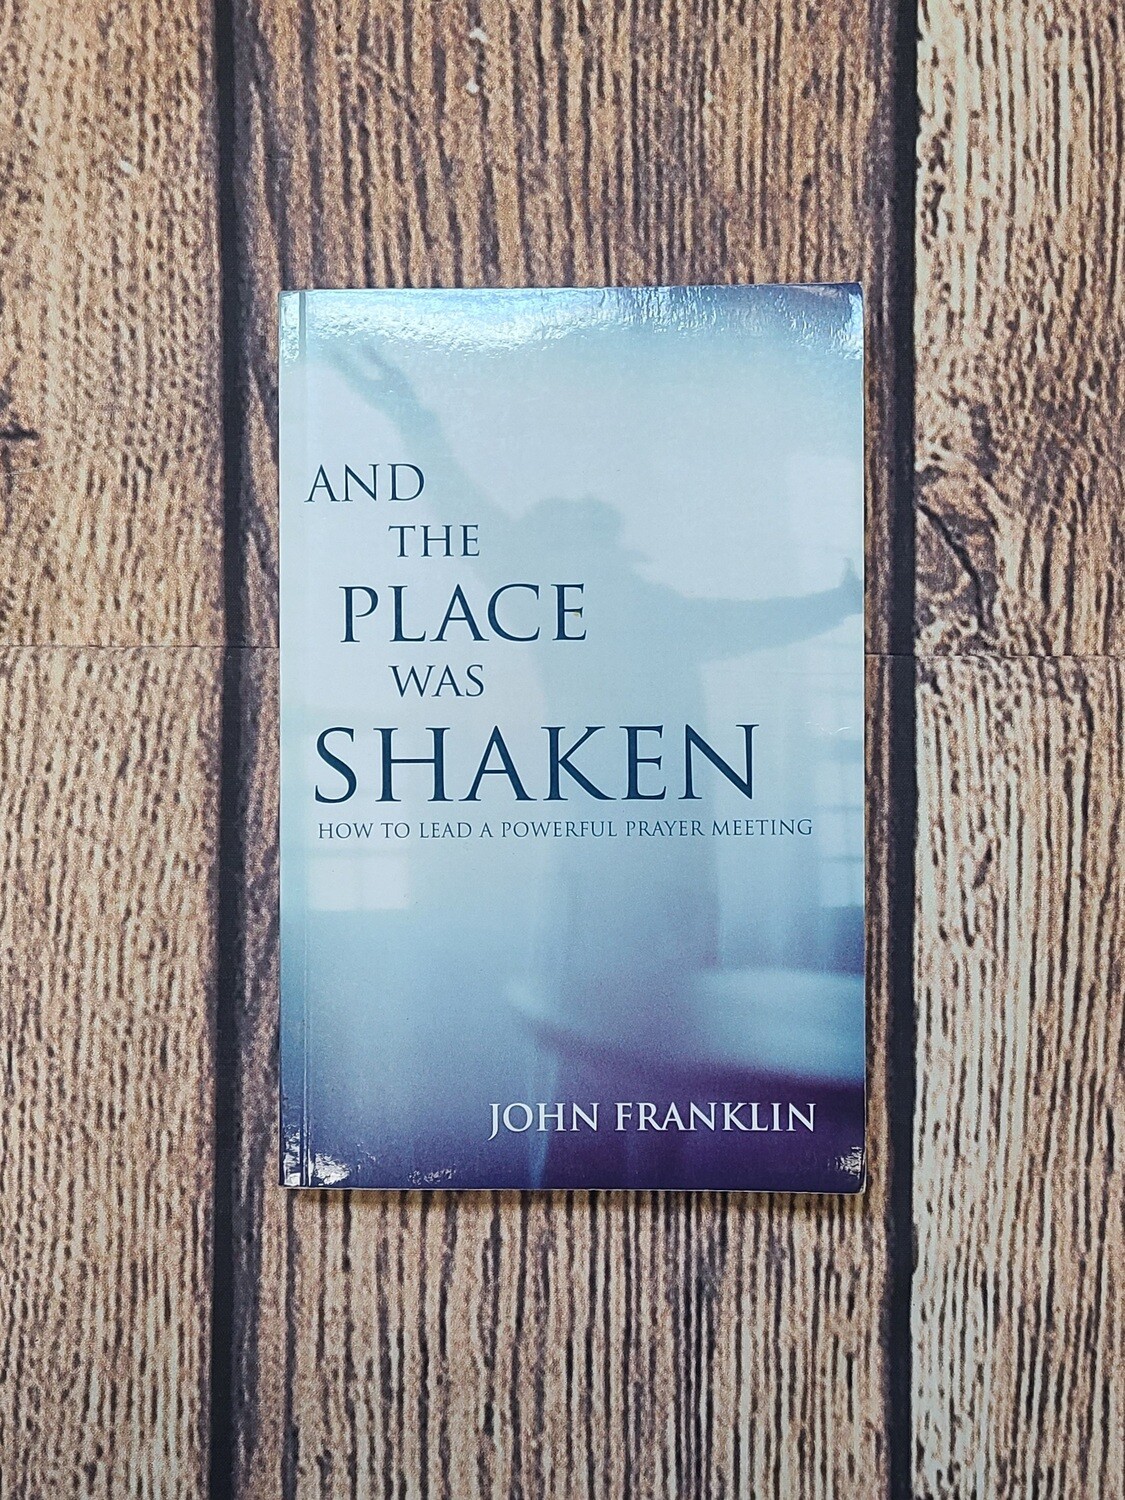 And the Place was Shaken: How to Lead a Powerful Prayer Meeting by John Franklin